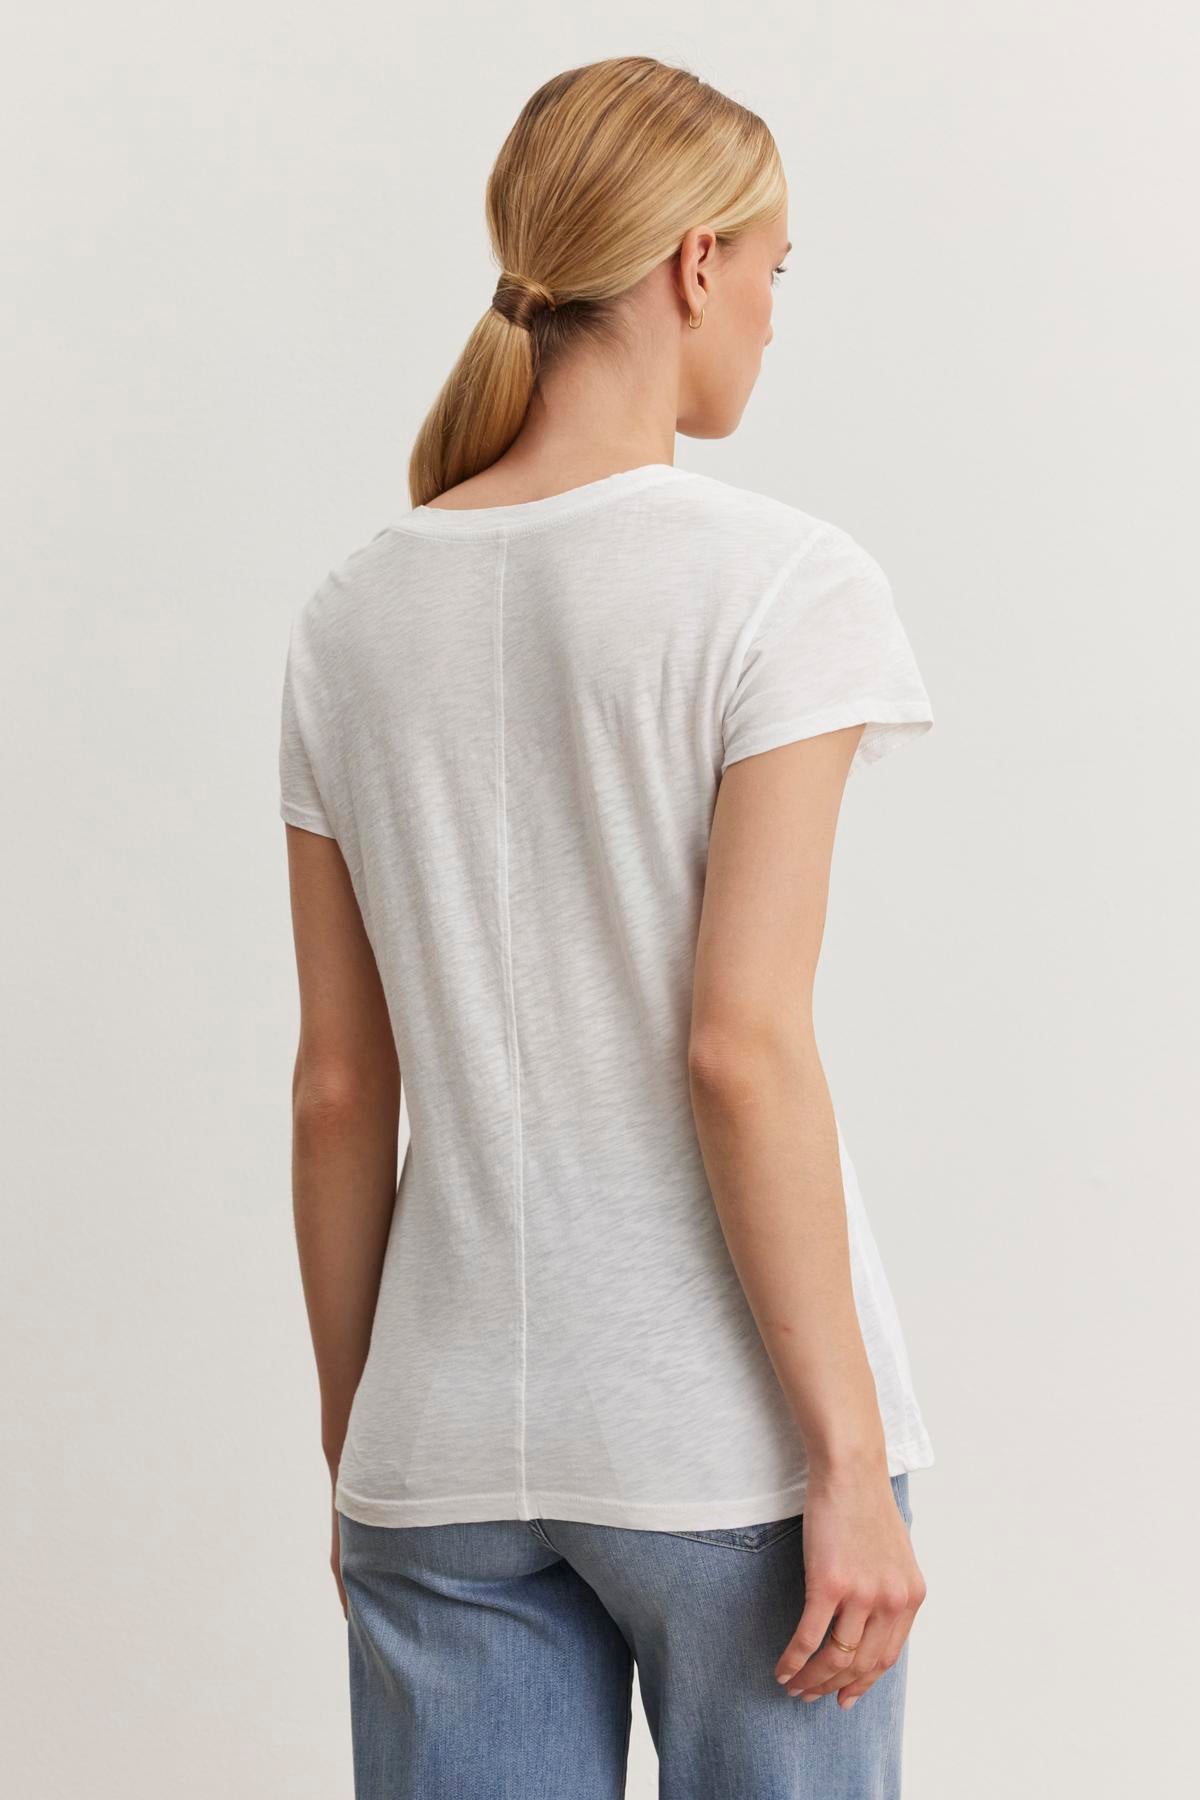   A person with blonde hair in a ponytail is facing away, wearing the Velvet by Graham & Spencer ODELIA TEE made from premium cotton slub fabric and blue jeans. 